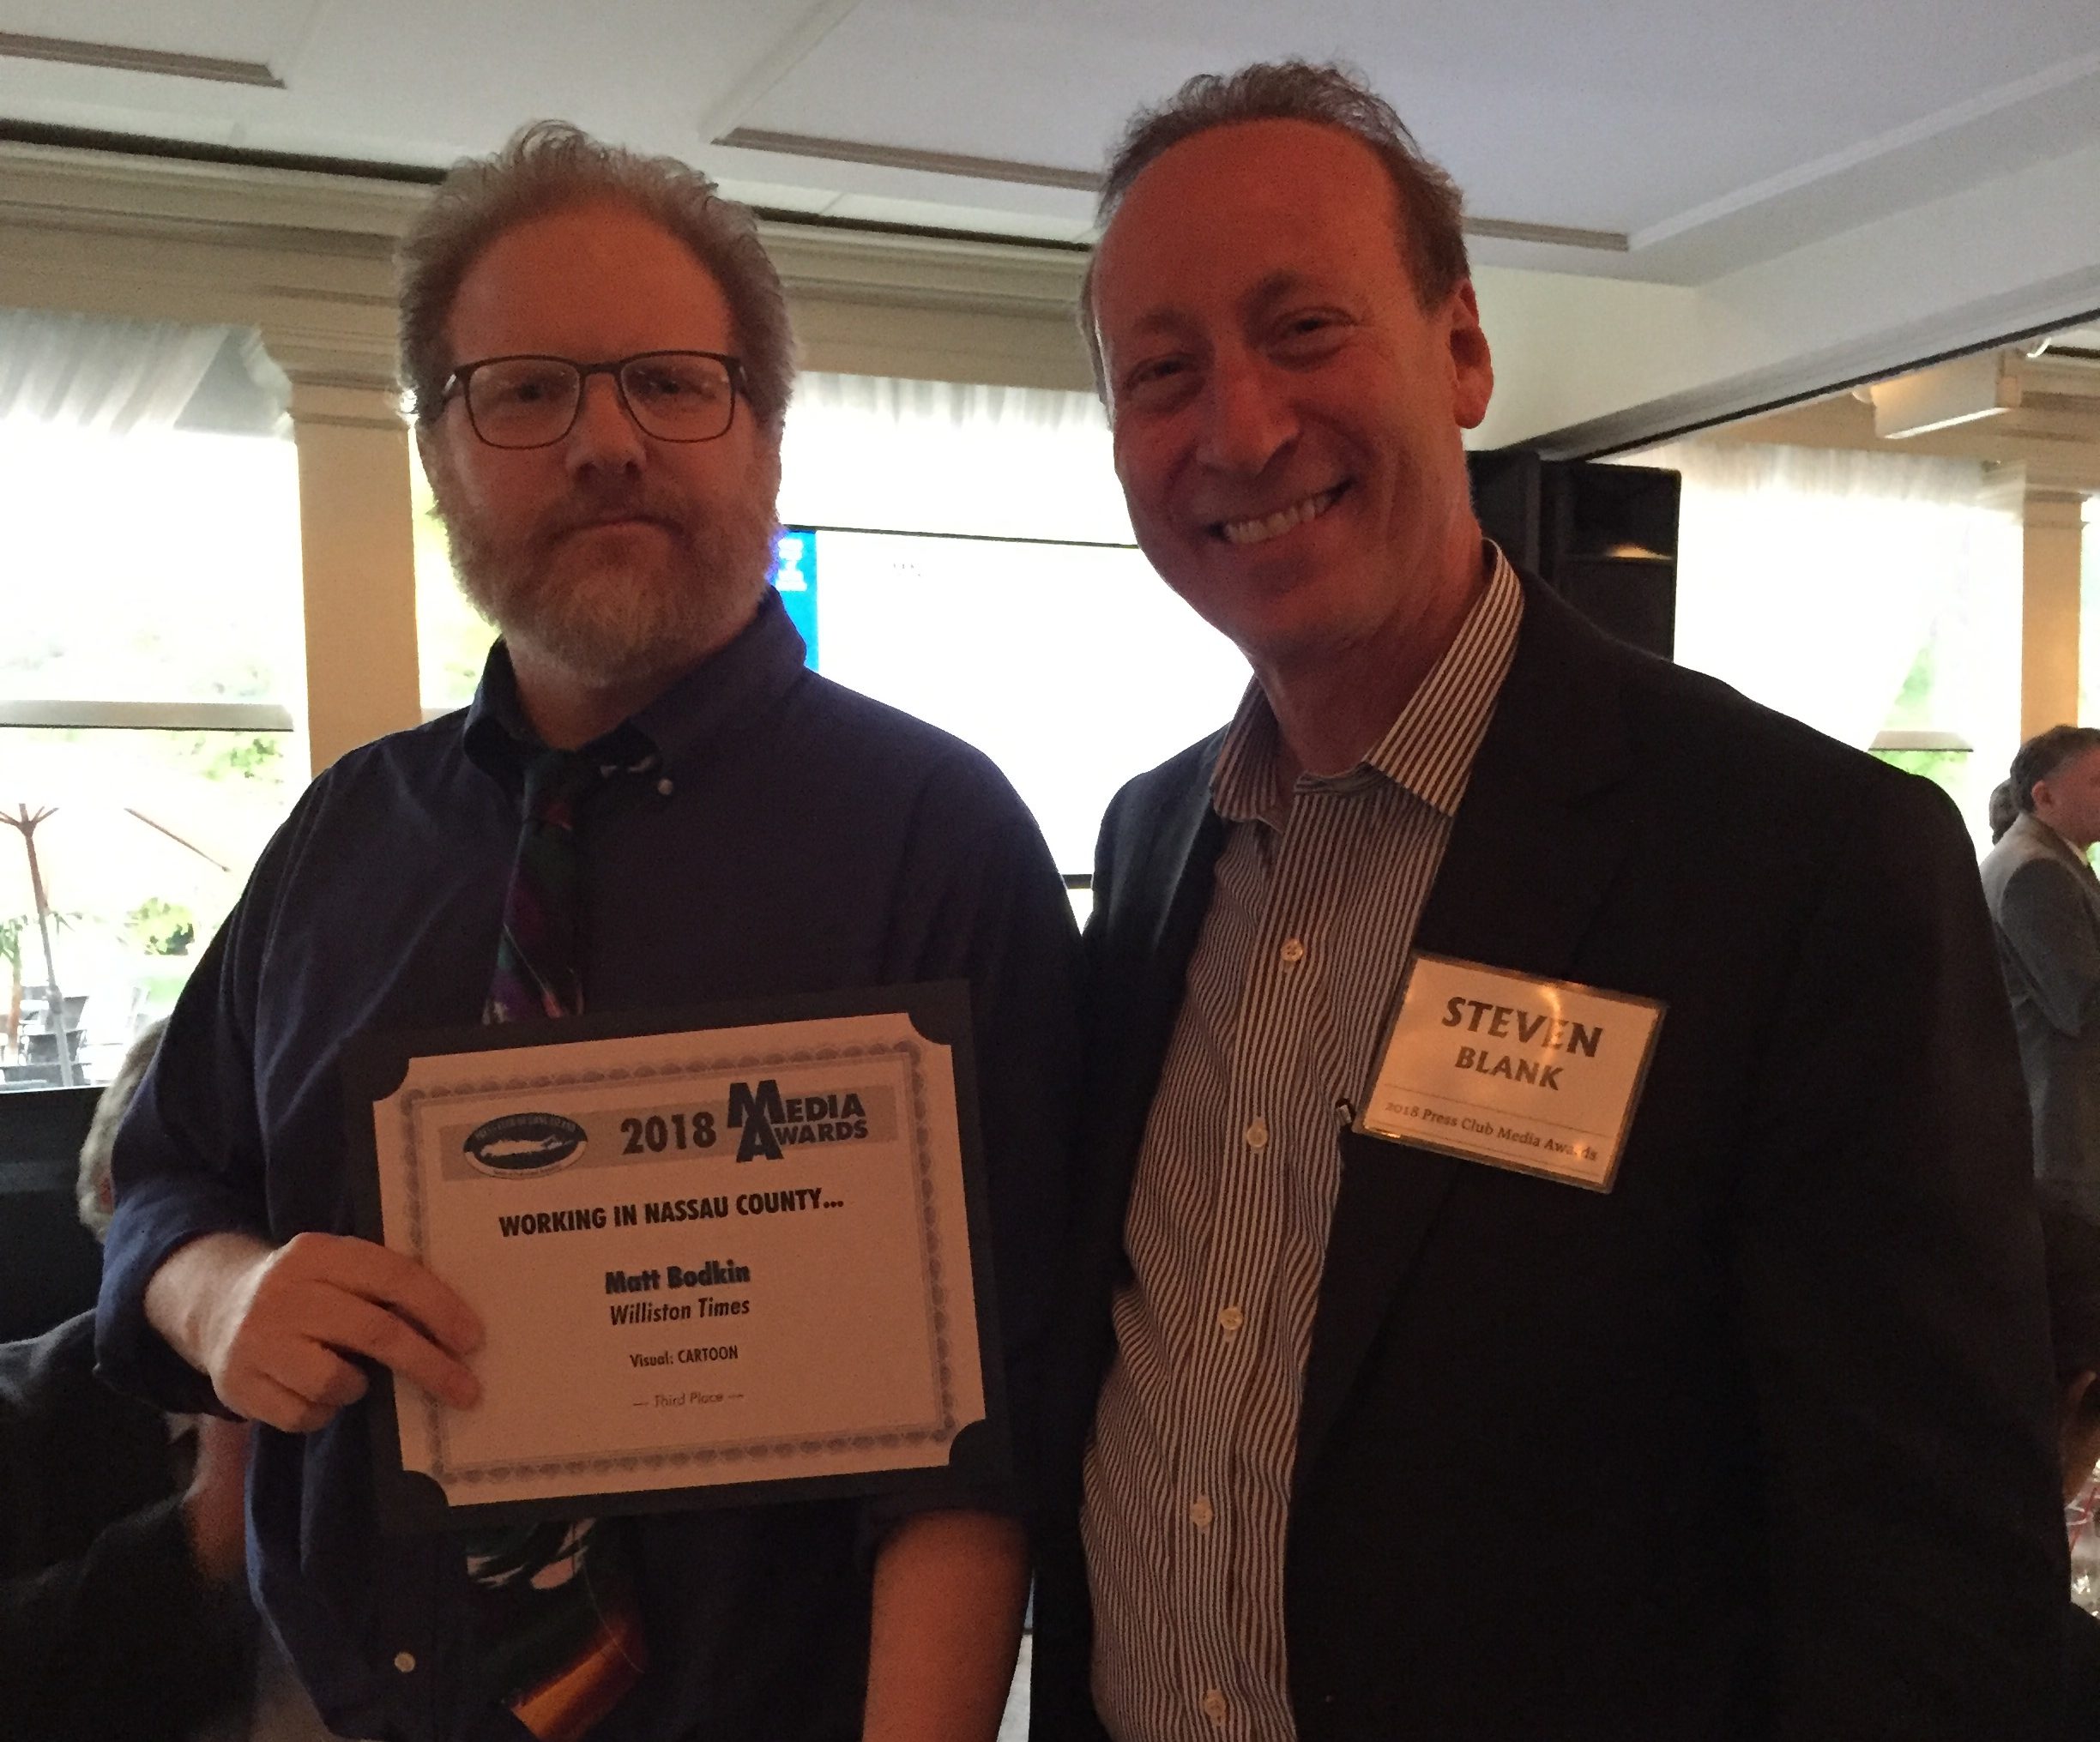 Editor and publisher Steve Blank poses for a photo with Matt Bodkin, who won third place for best editorial cartoon. (Photo courtesy of Steve Blank)